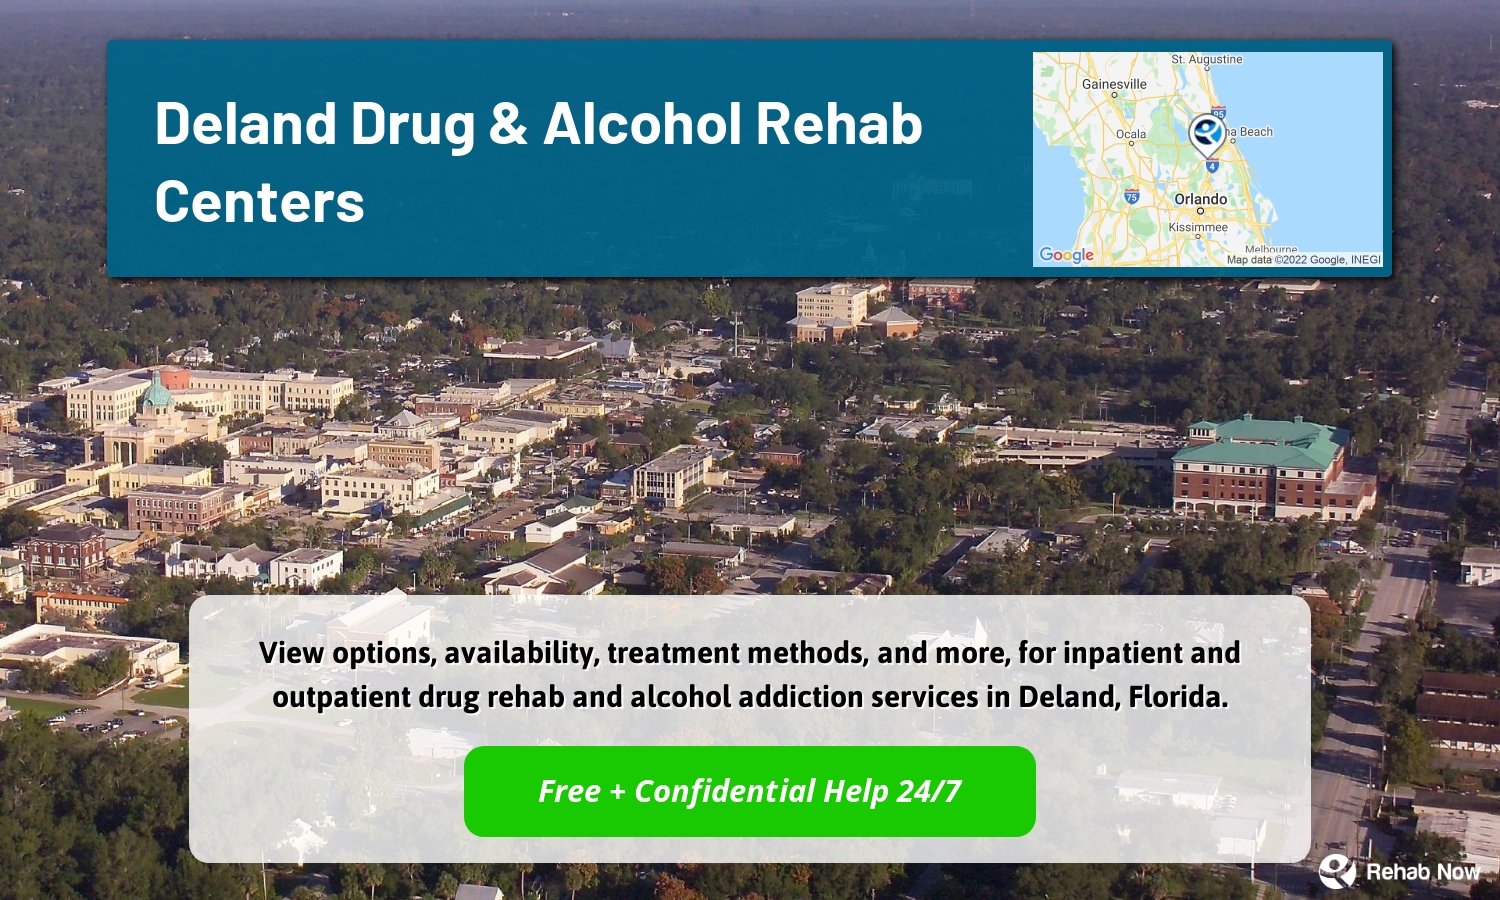 View options, availability, treatment methods, and more, for inpatient and outpatient drug rehab and alcohol addiction services in Deland, Florida.